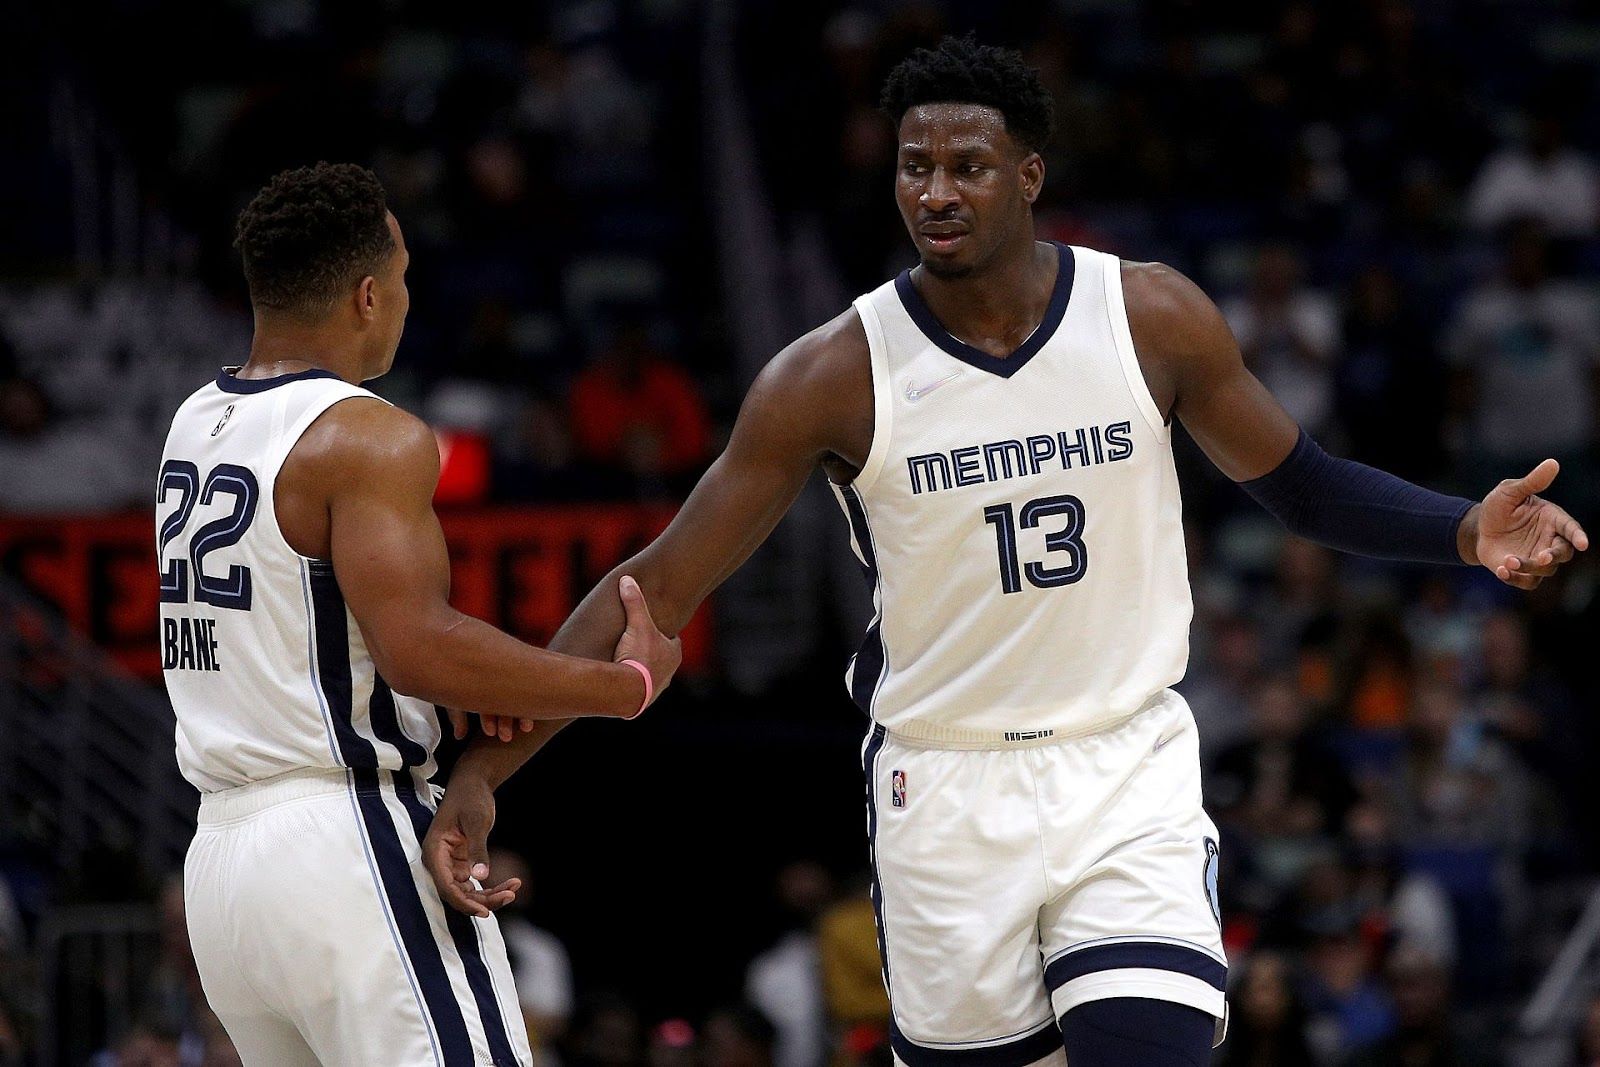 NBA Betting News: Hornets are hurt right now, Grizzlies rolling without Morant